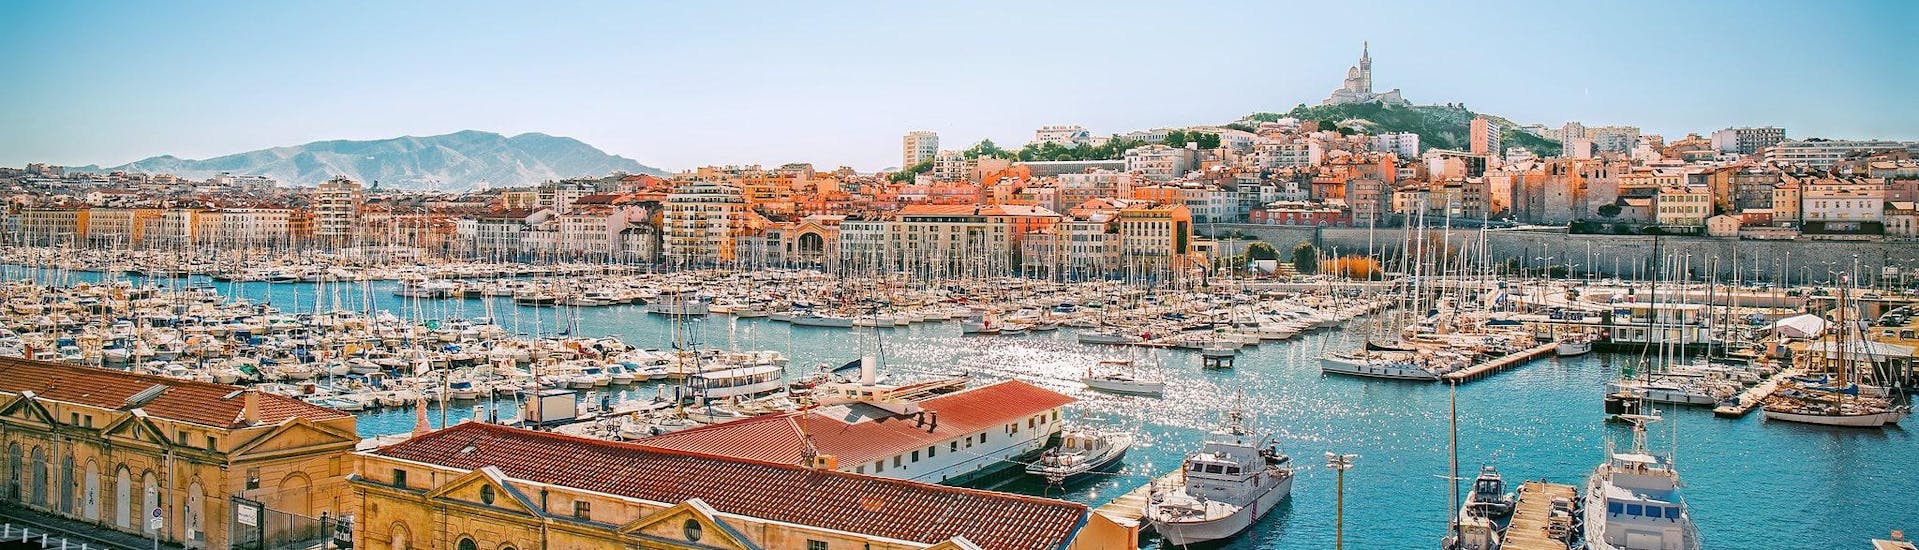 Der View of the Old Port, where many boat tours in Marseille start.